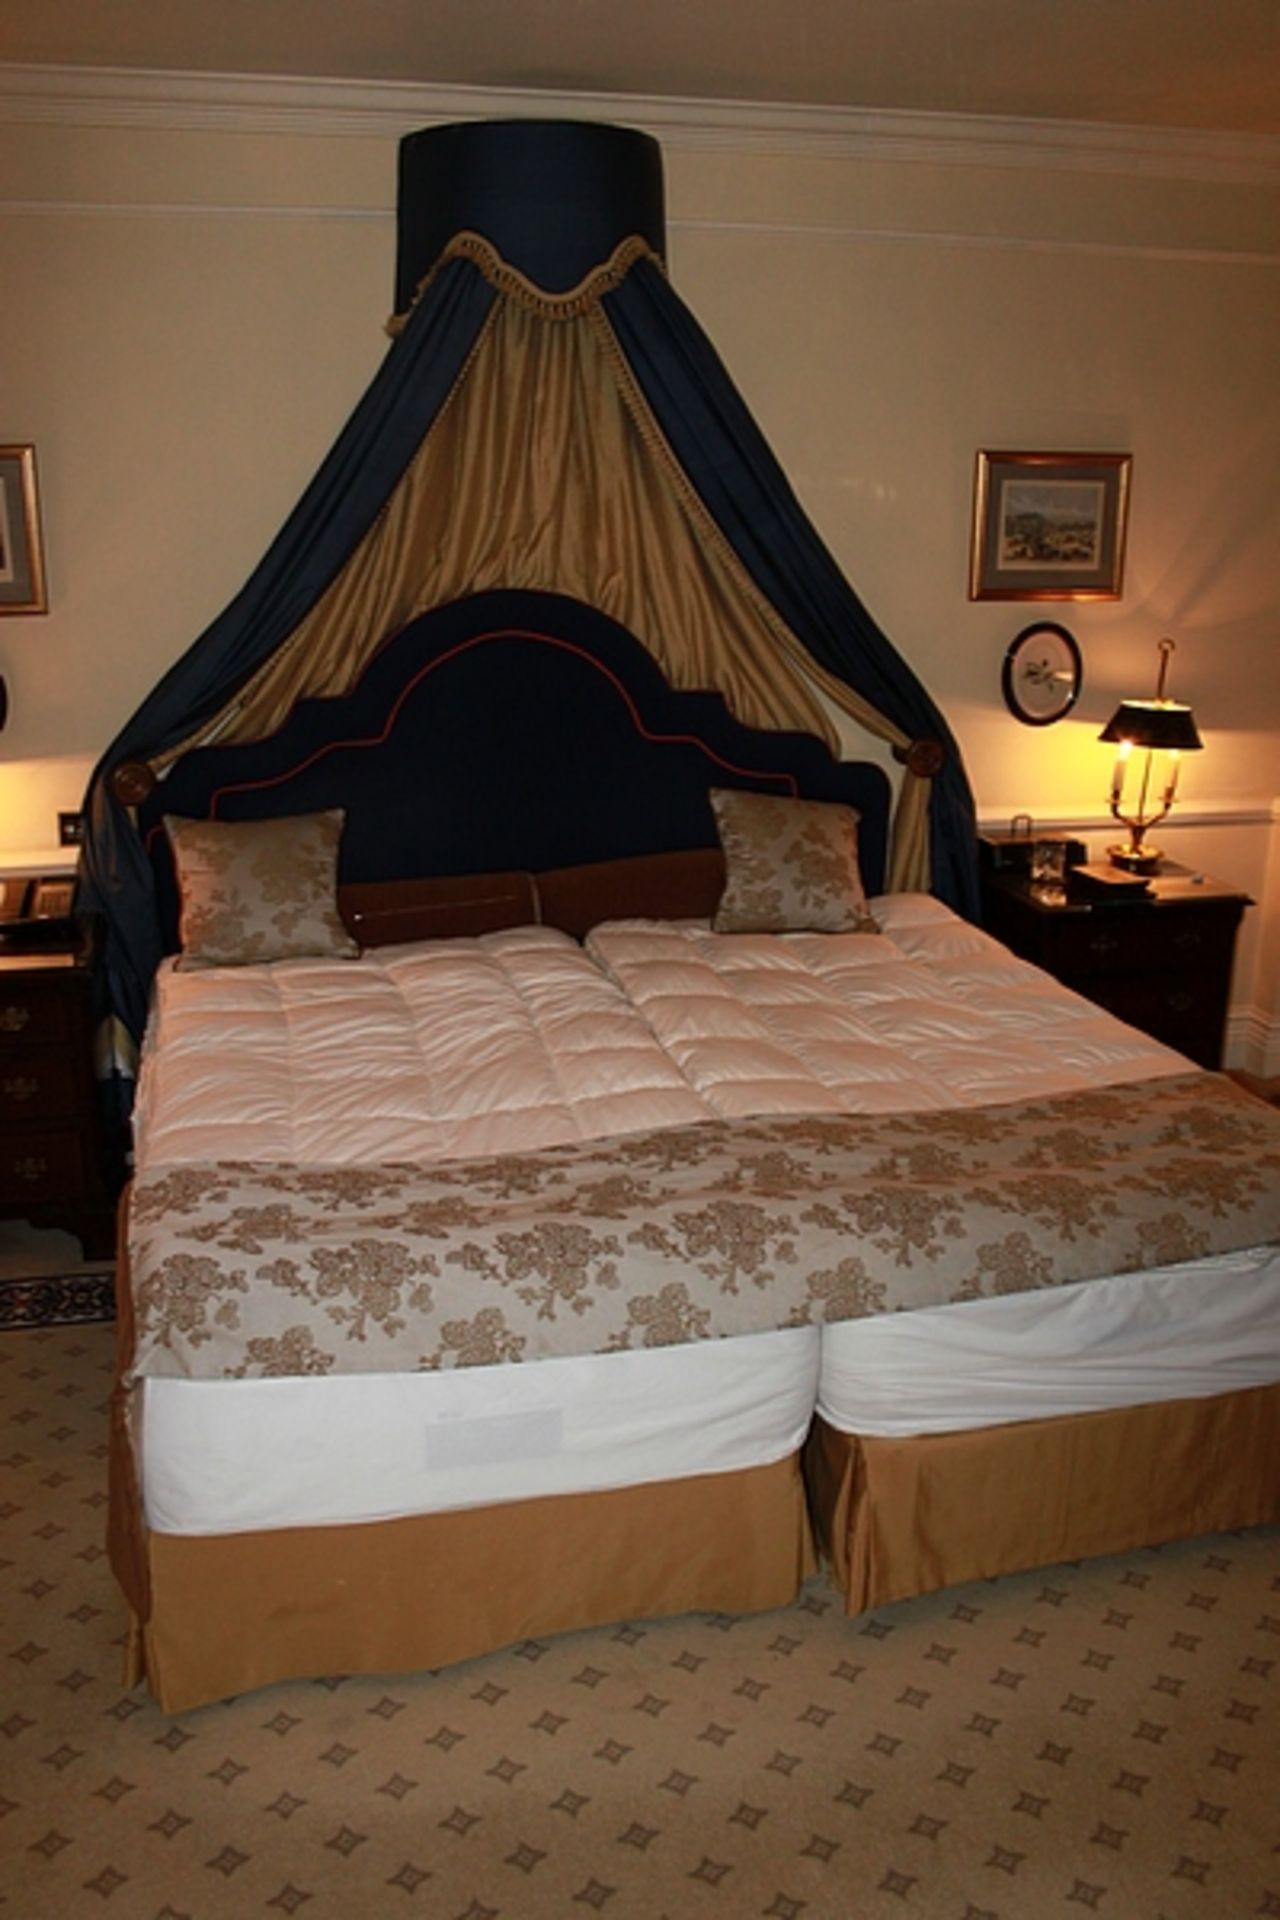 Hospitality Simmons Bedding Company base, mattress and blue domed single piped headboard complete